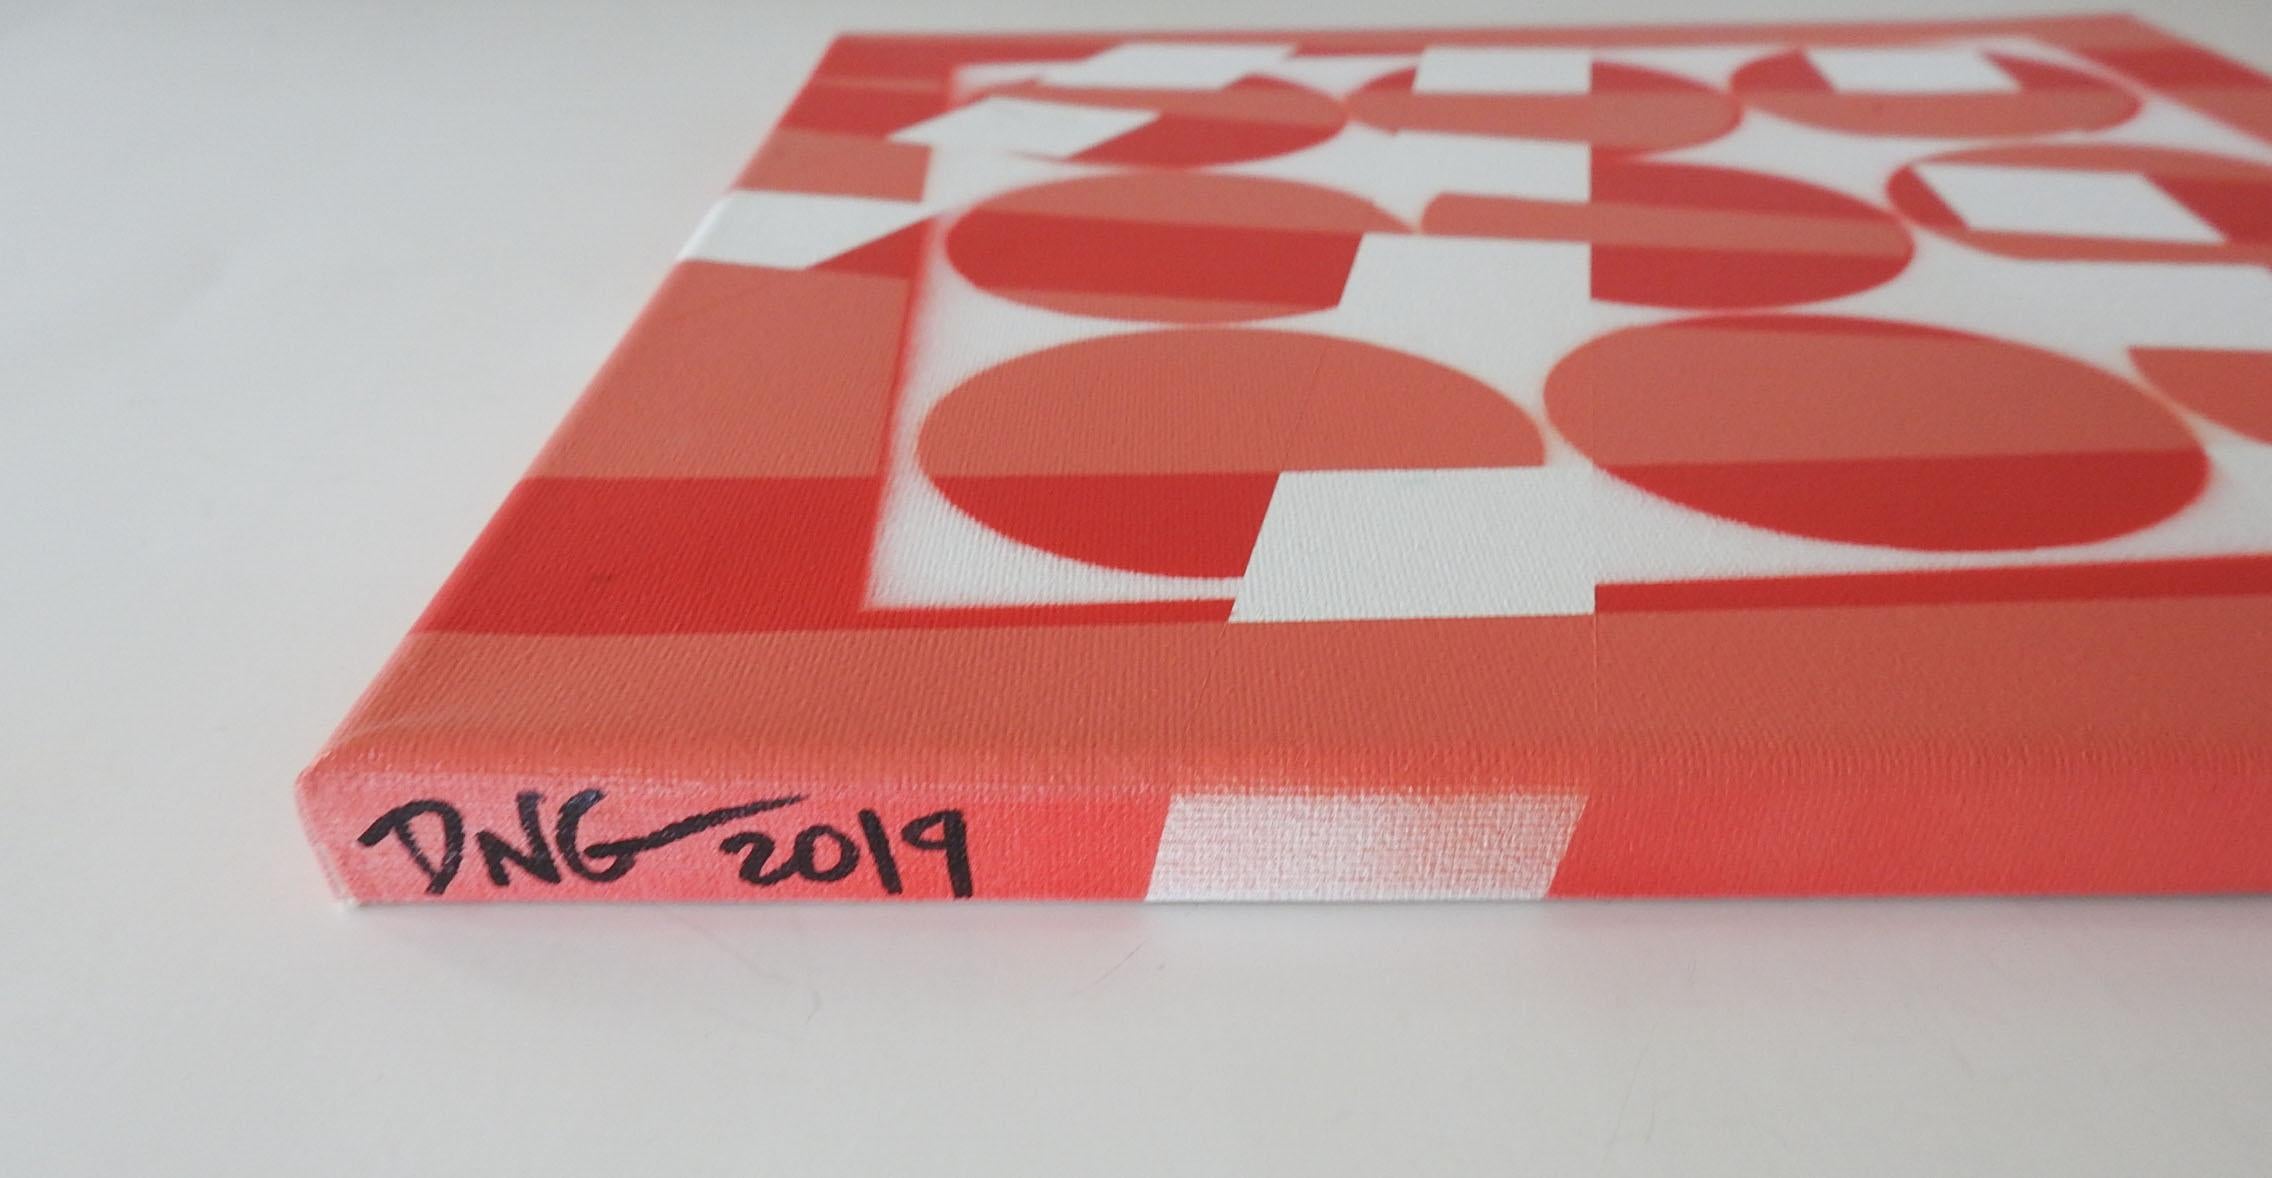 2019 abstract acrylic on canvas painting by David Grinnell (21st century) Texas. In red, salmon and white. Signed, titled Negative Red on edge and verso. Unframed.